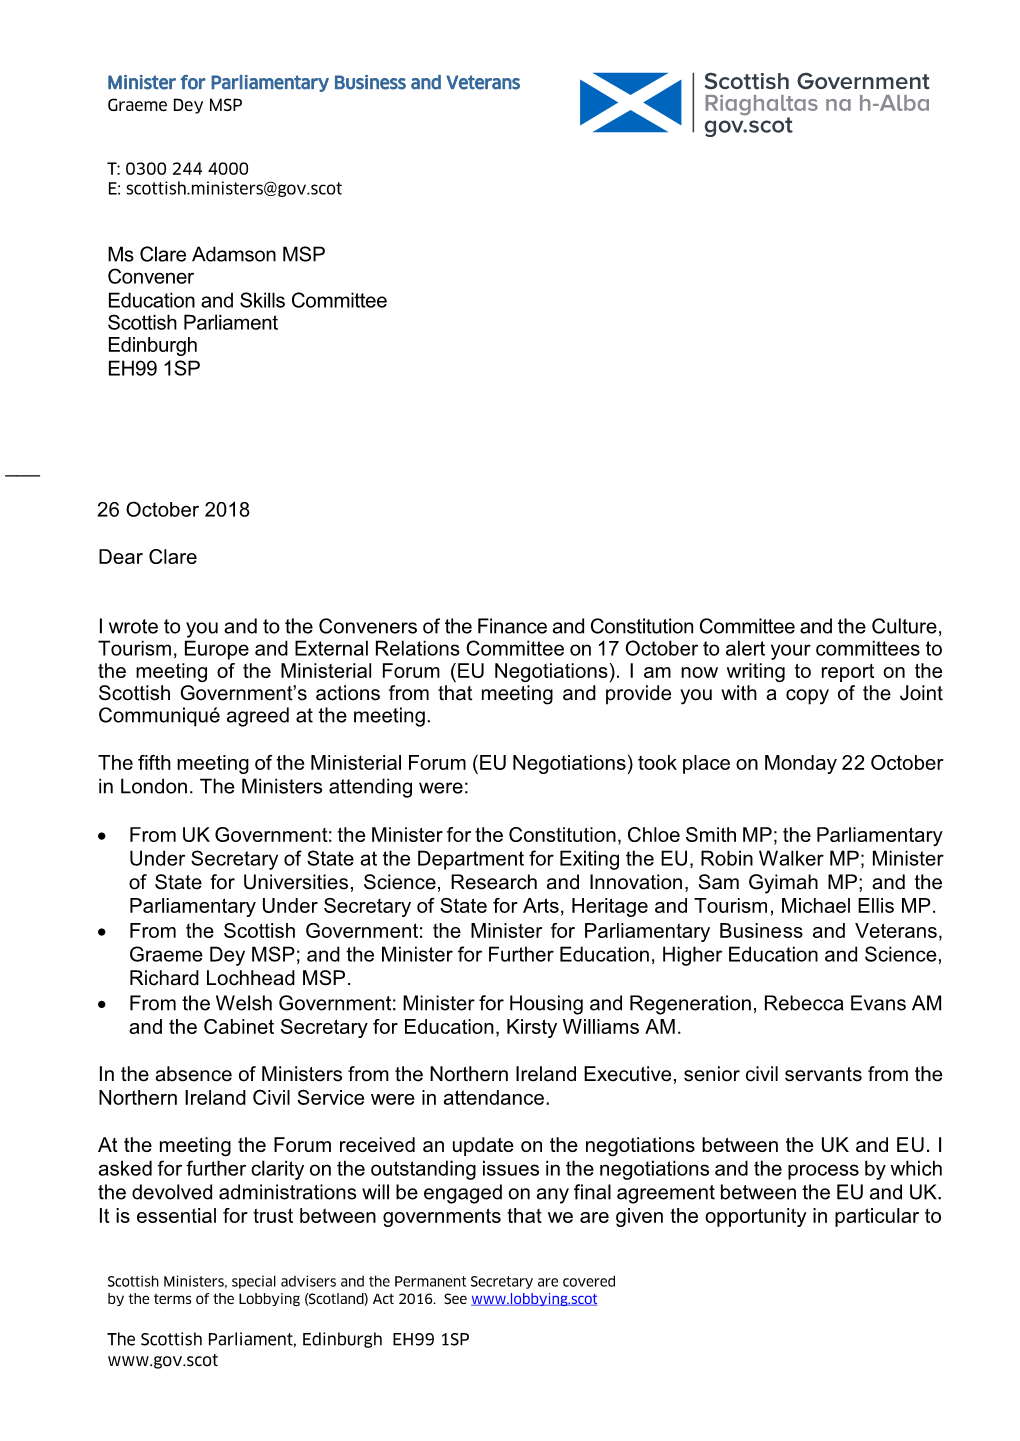 Letter from the Minister for Parliamentary Business and Veterans Regarding the Ministerial Forum